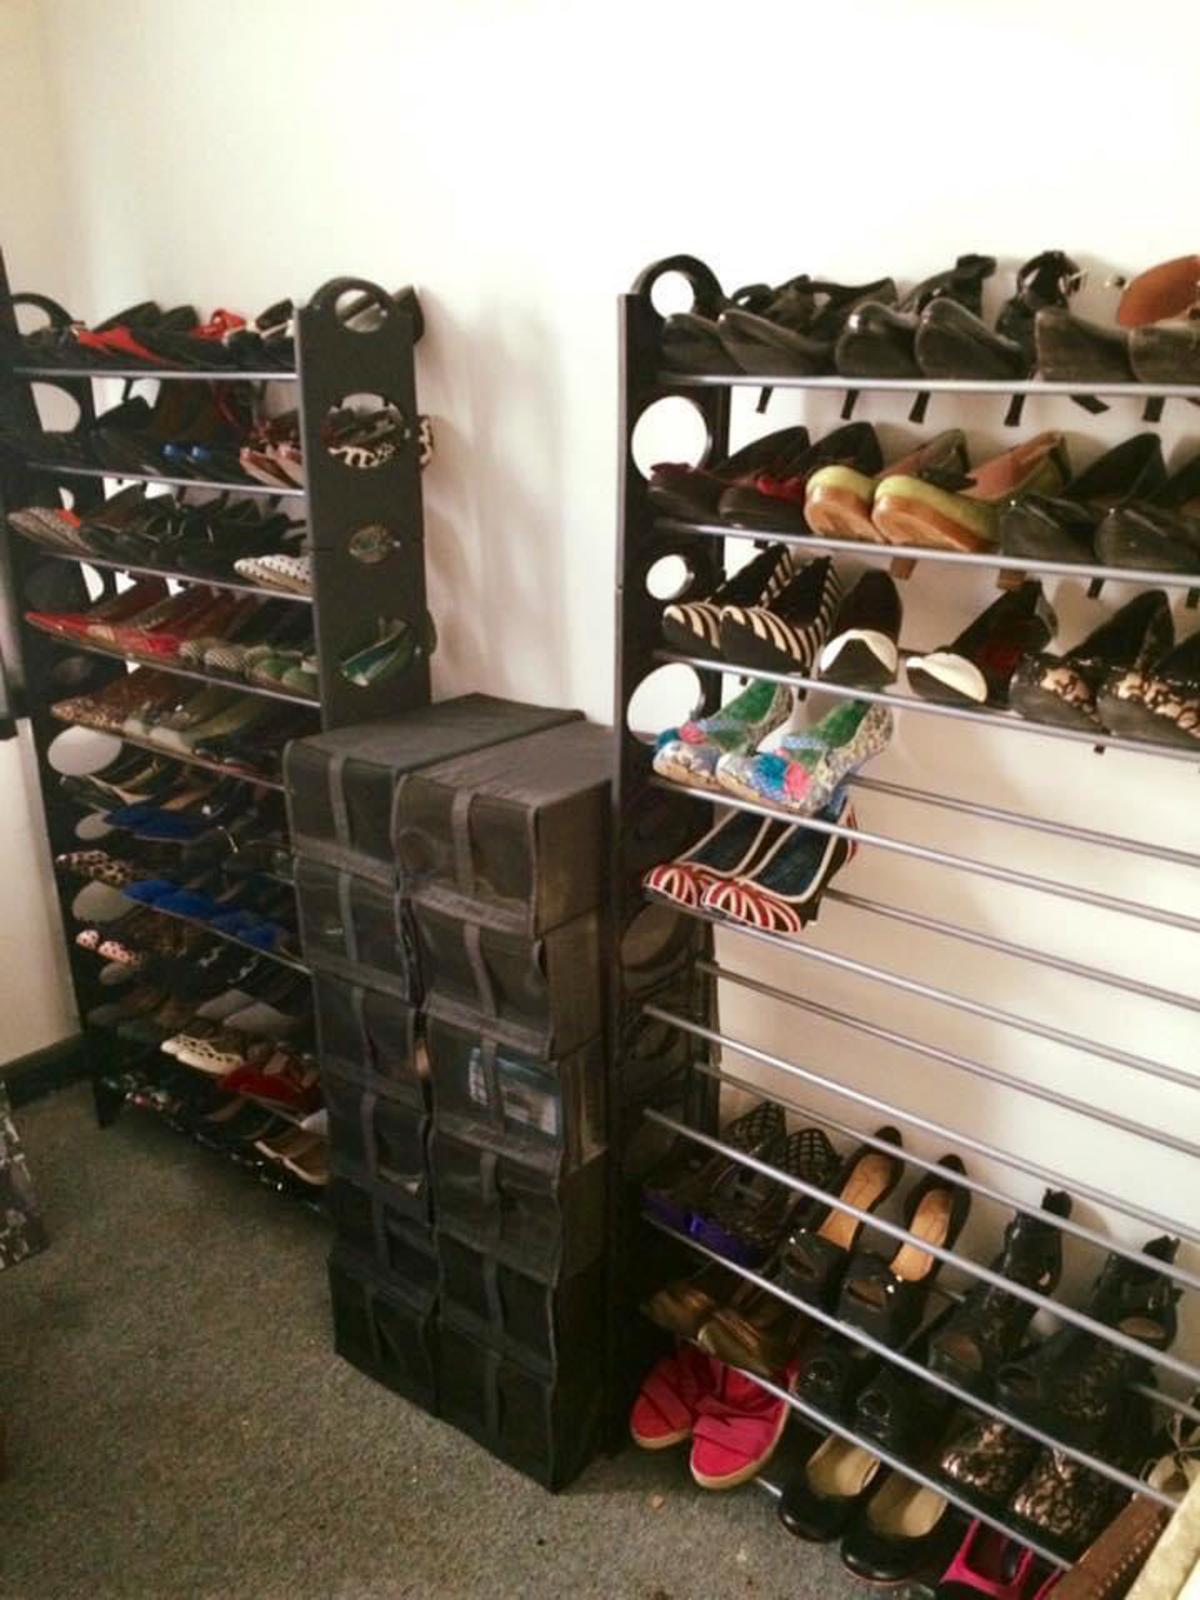 Before the transformation, the tiny room housed shoes. (Caters News)